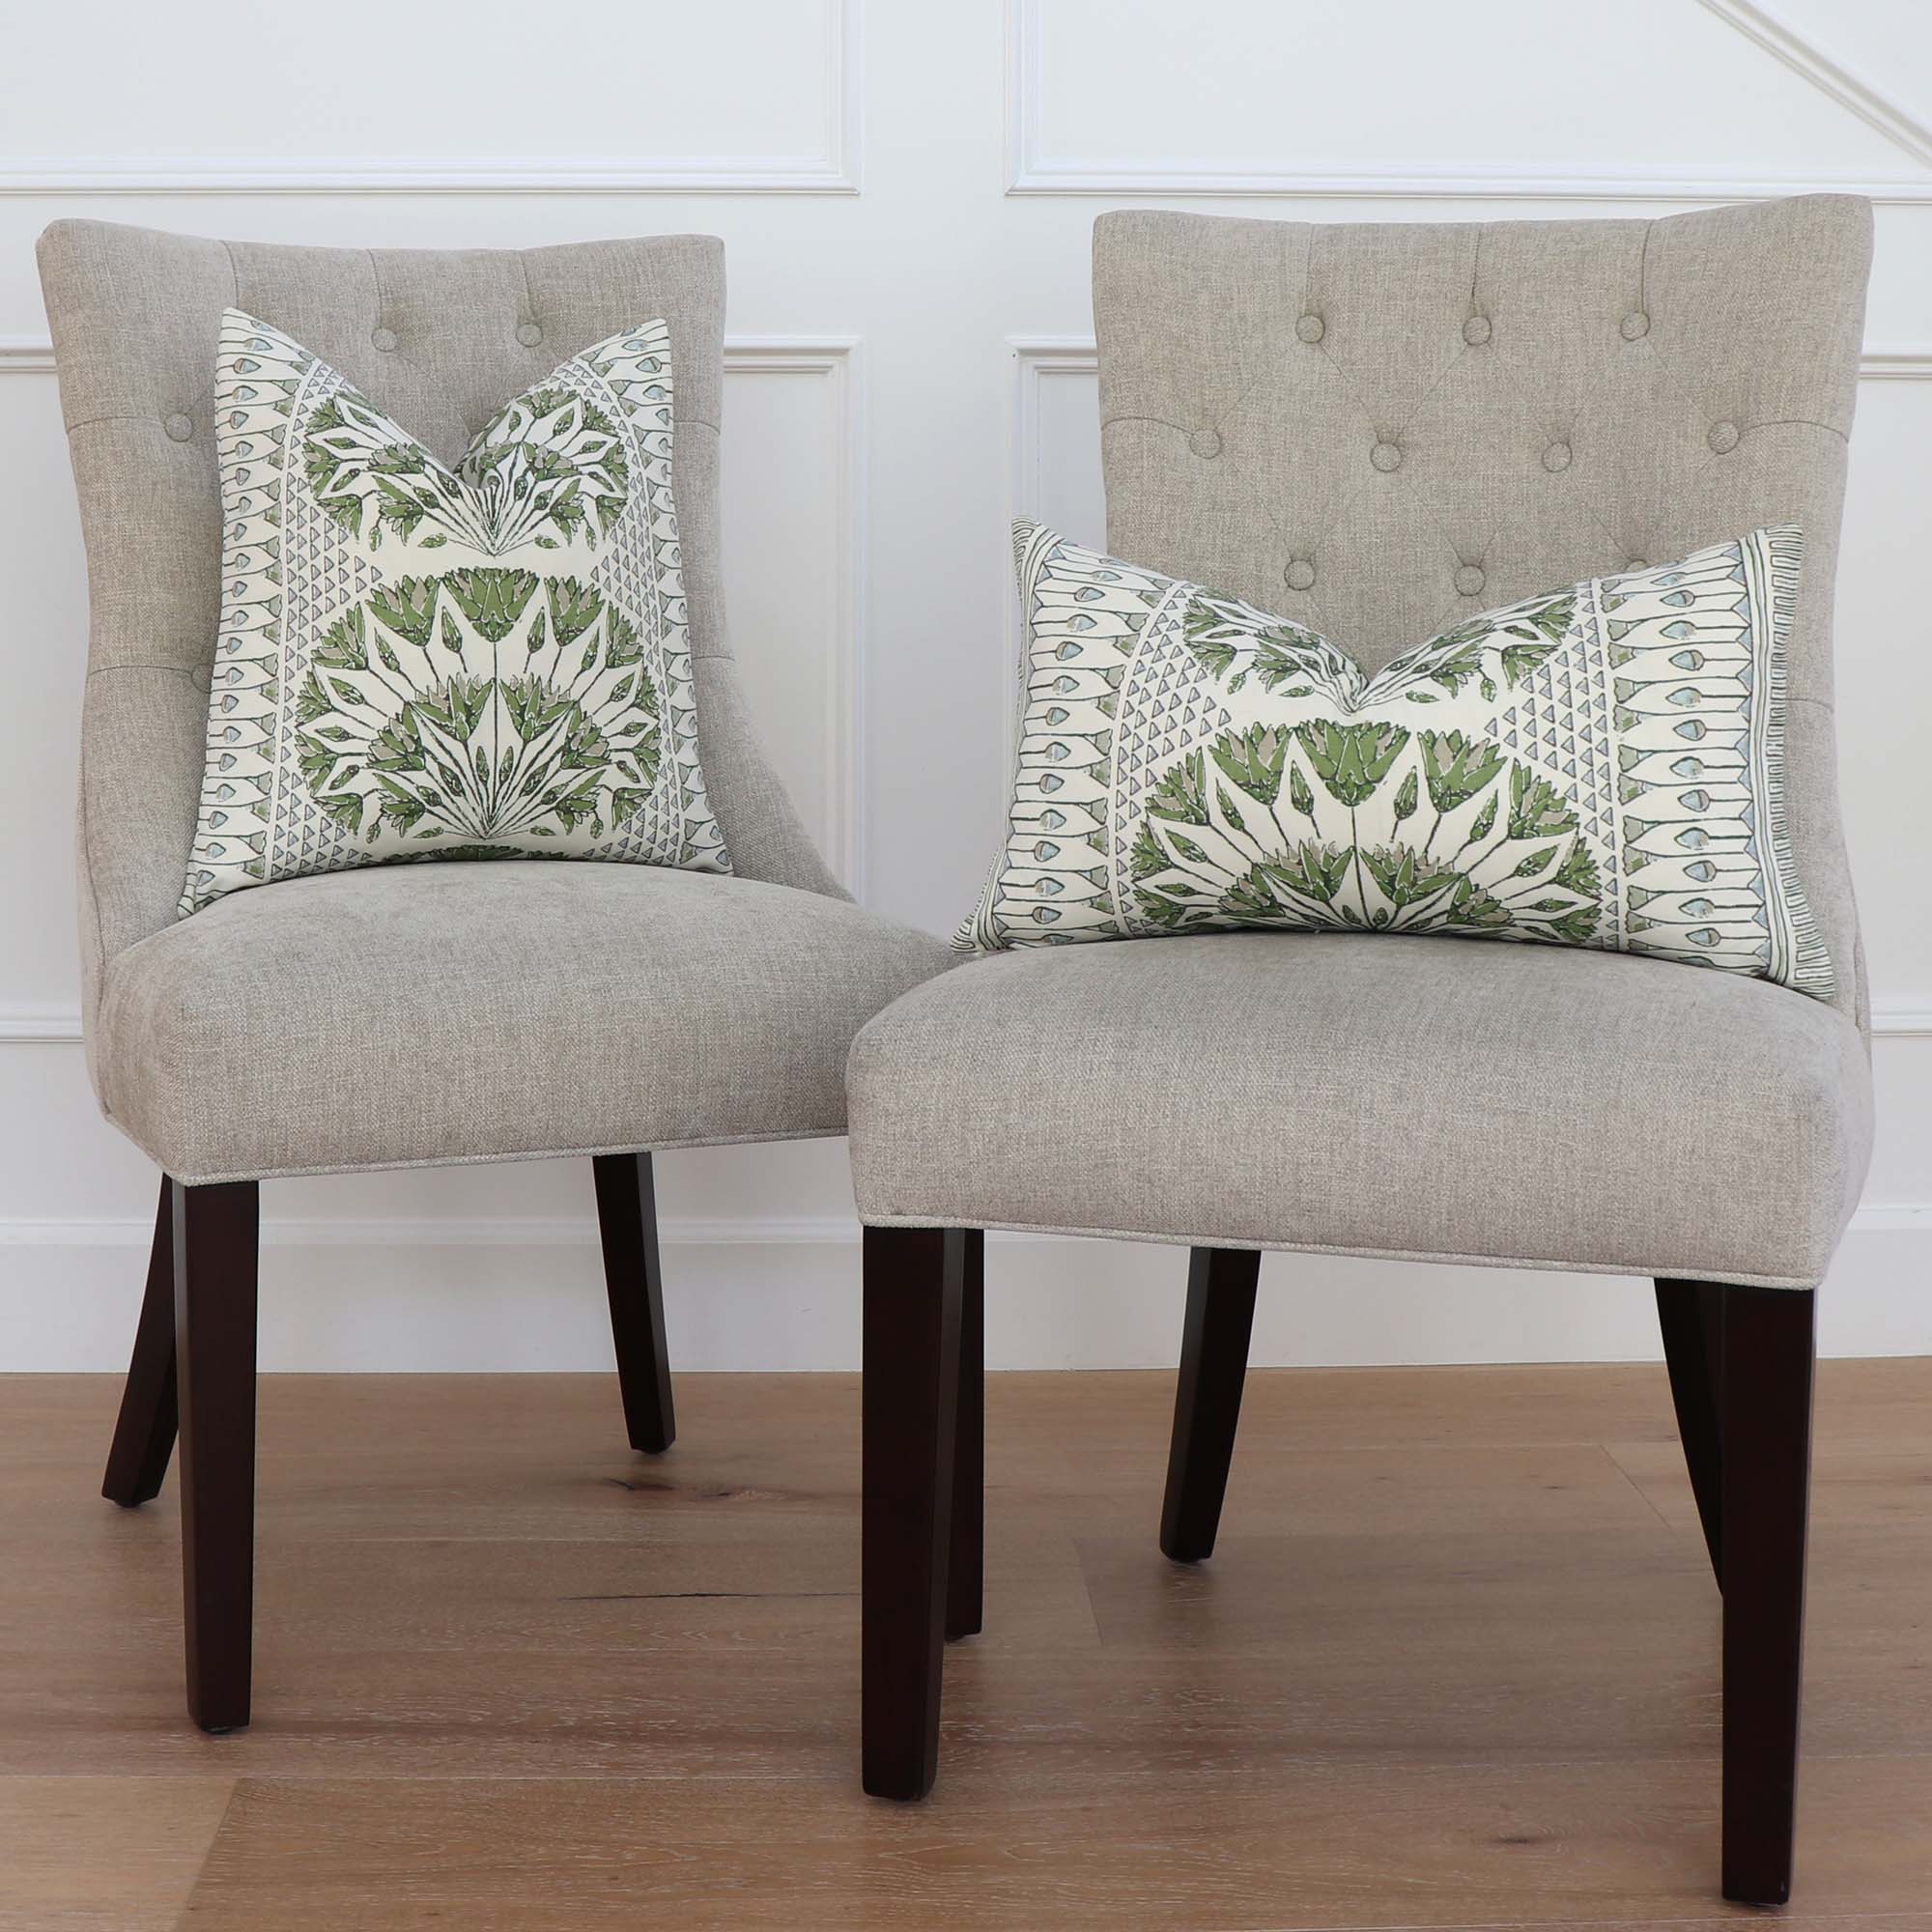 https://www.chloeandolive.com/cdn/shop/products/Thibaut-Anna-French-Cairo-Floral-Green-White-AF9623-Designer-Luxury-Throw-Pillow-Cover-on-Kitchen-Dining-Chairs-in-Home-Decor_5000x.jpg?v=1630975003